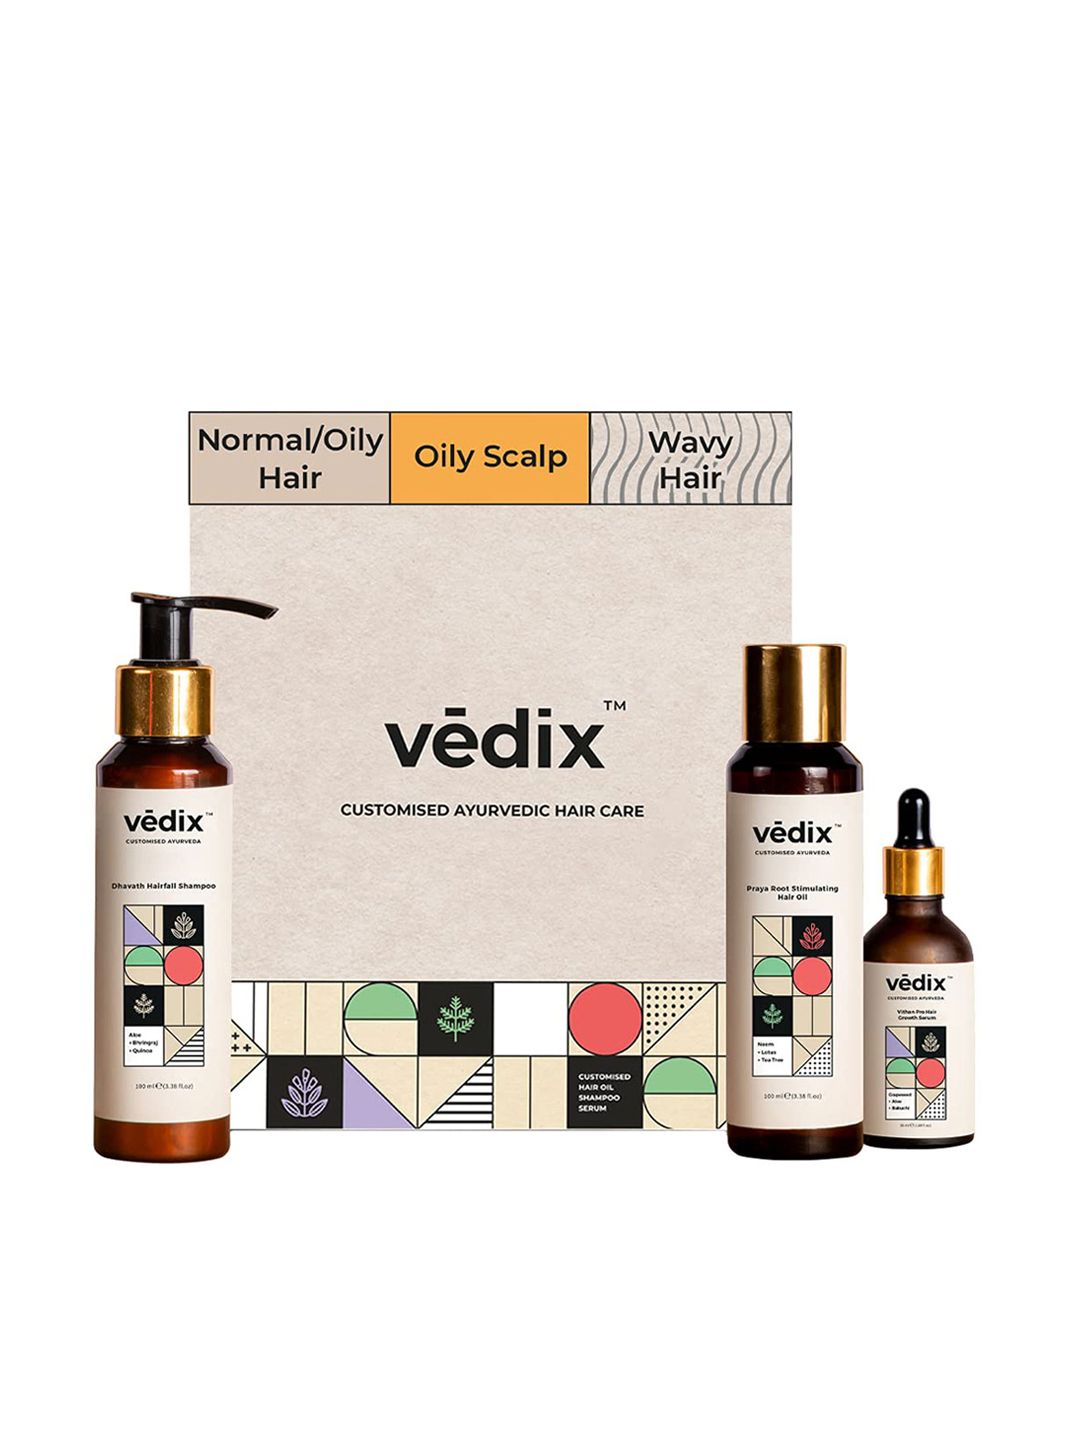 VEDIX Womens Customized Hair Fall Control Regimen for Normal/Oily Hair - Wavy Hair Price in India